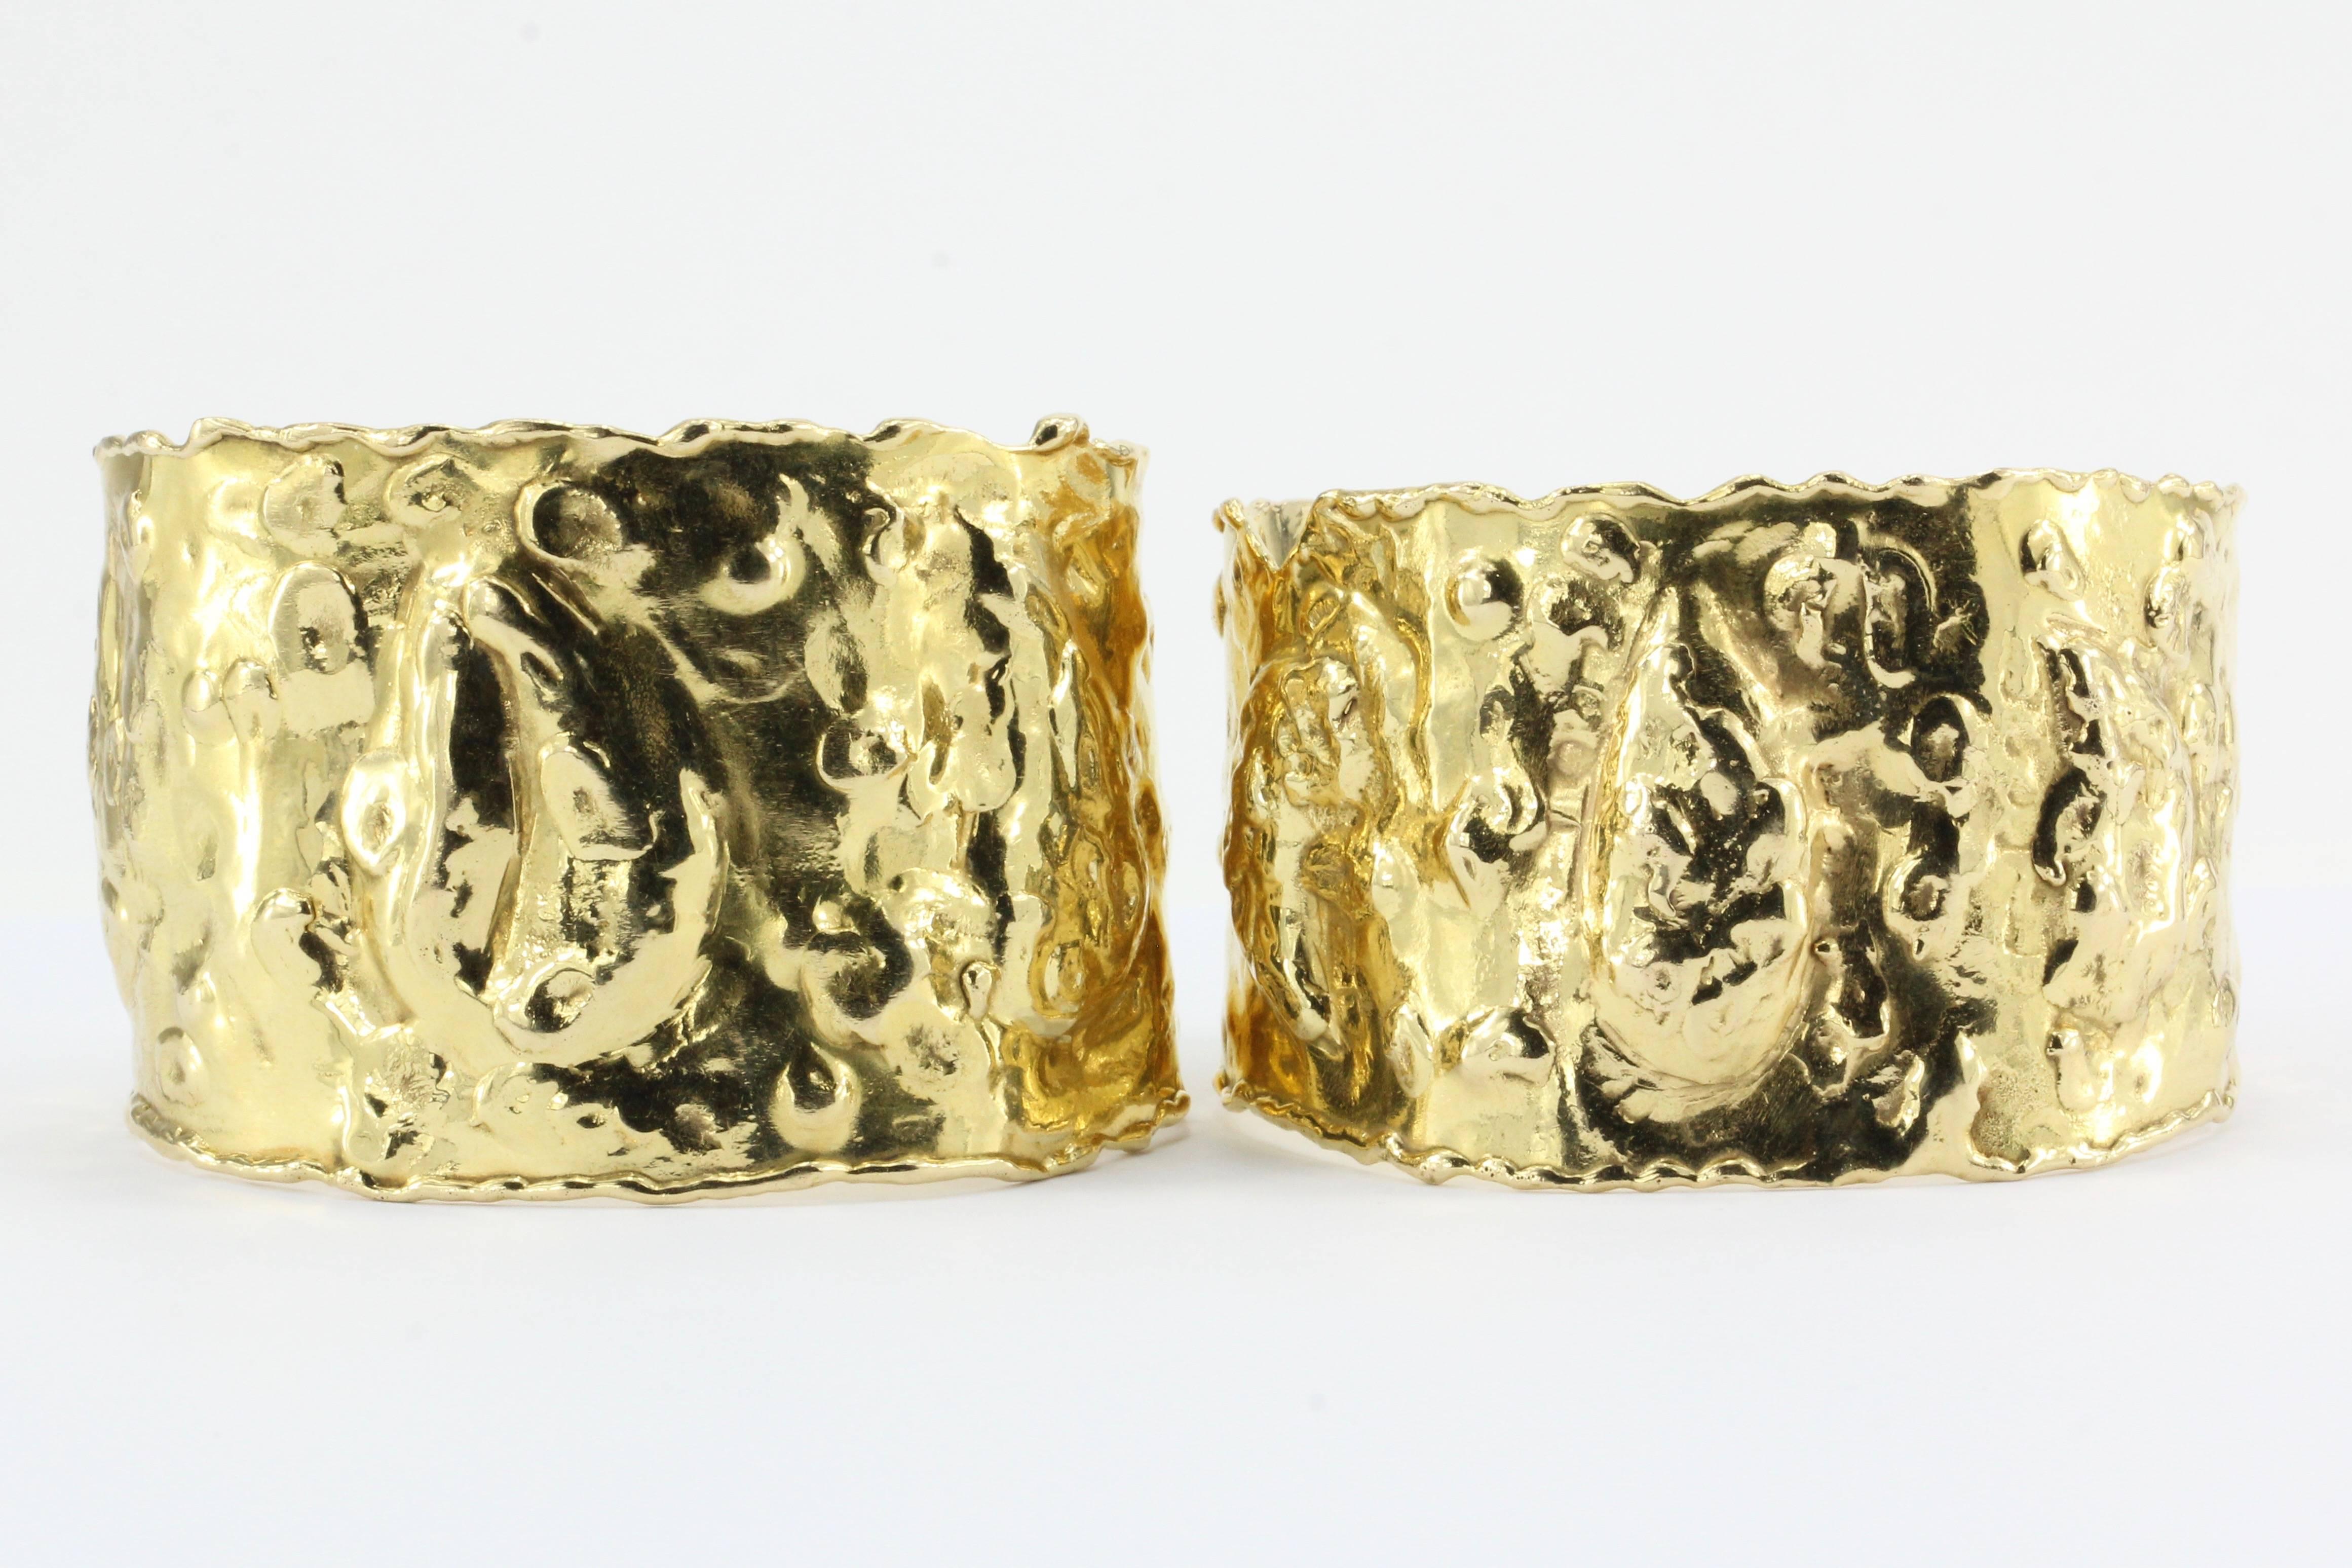 Van Cleef & Arpels 18K Gold Jackie-O Manchette Cuff Bracelets Pair c.1970

Inspired by the goldsmith work of Ancient Greece and made famous by style icon Jacqueline Kennedy Onassis when she first wore them in public in 1977. Each cuff is in